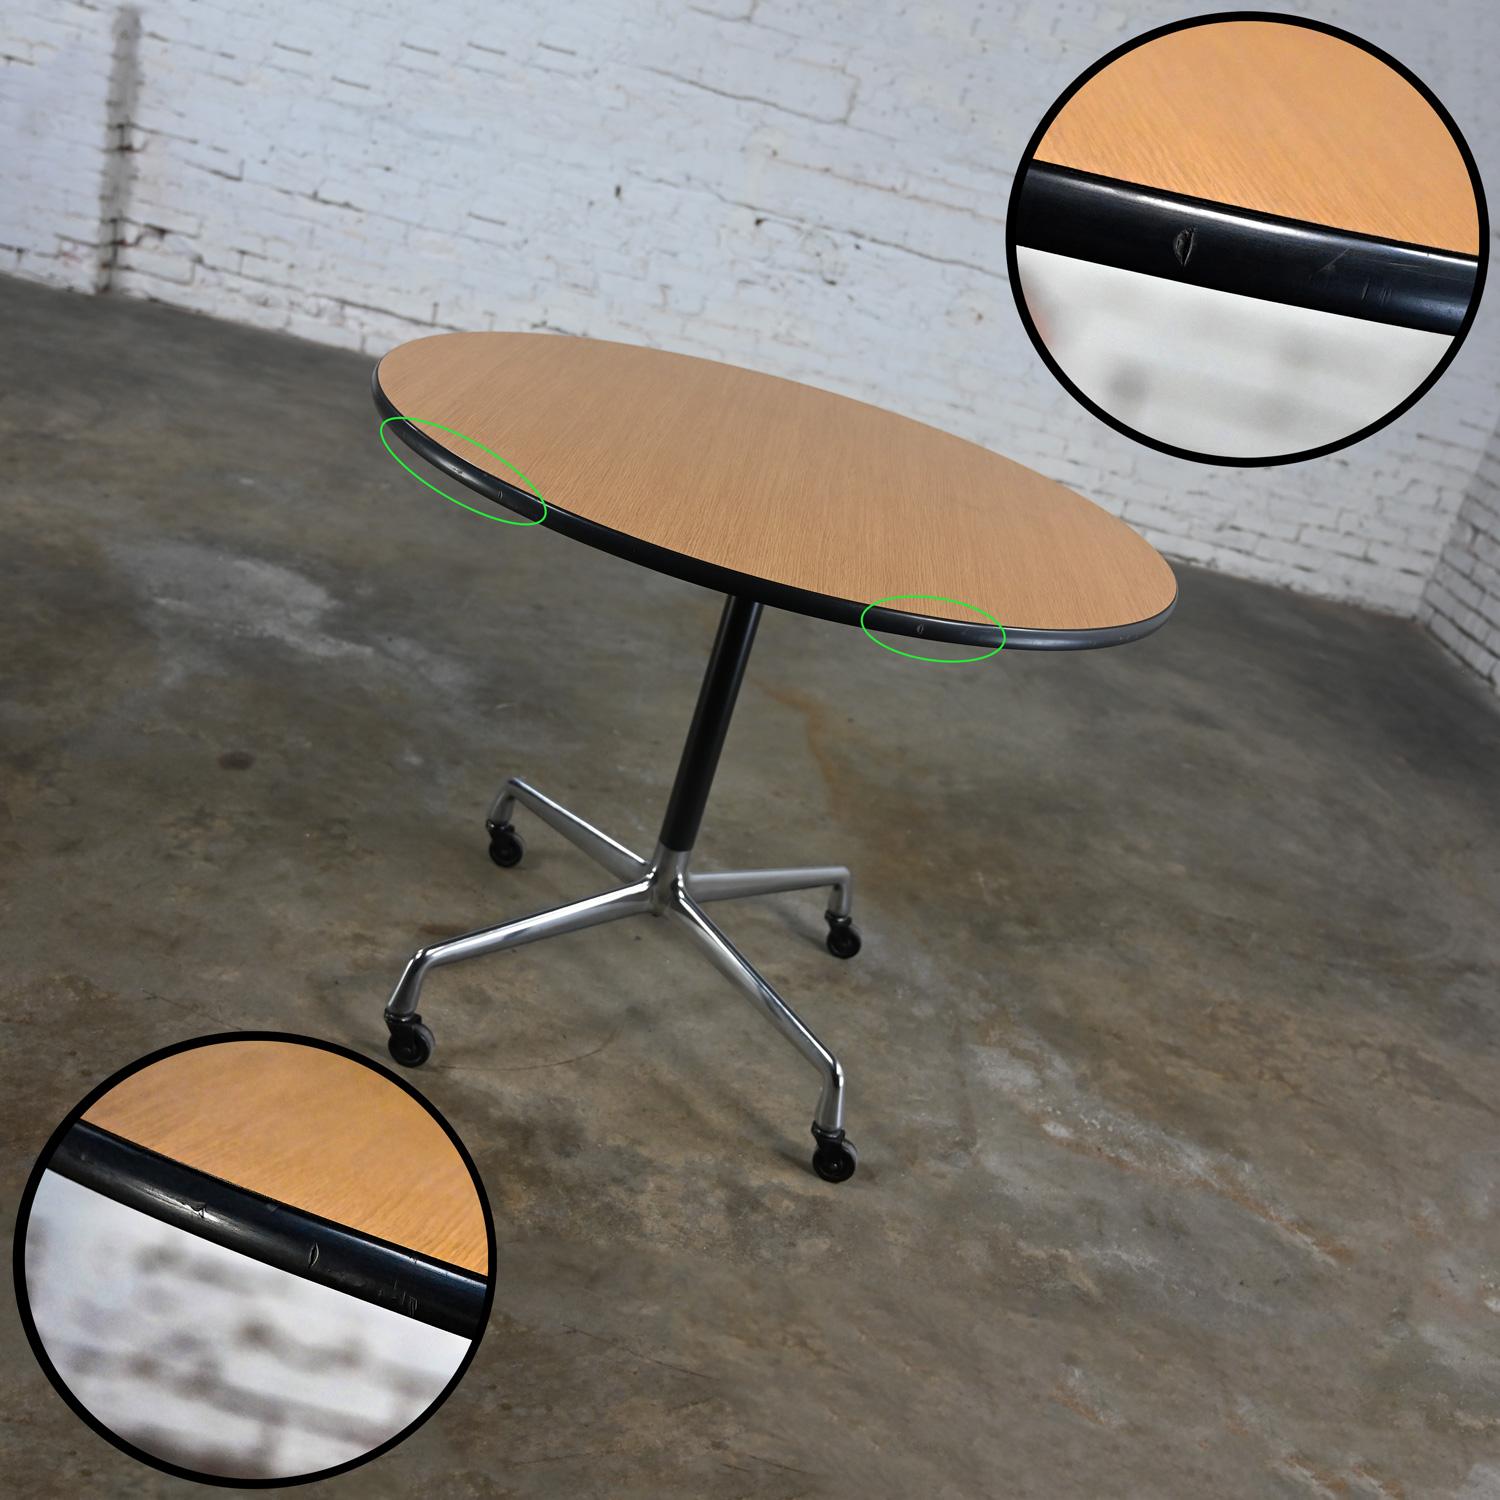 Eames Herman Miller Round Table Universal Base Casters & 36” Blonde Laminate Top For Sale 7